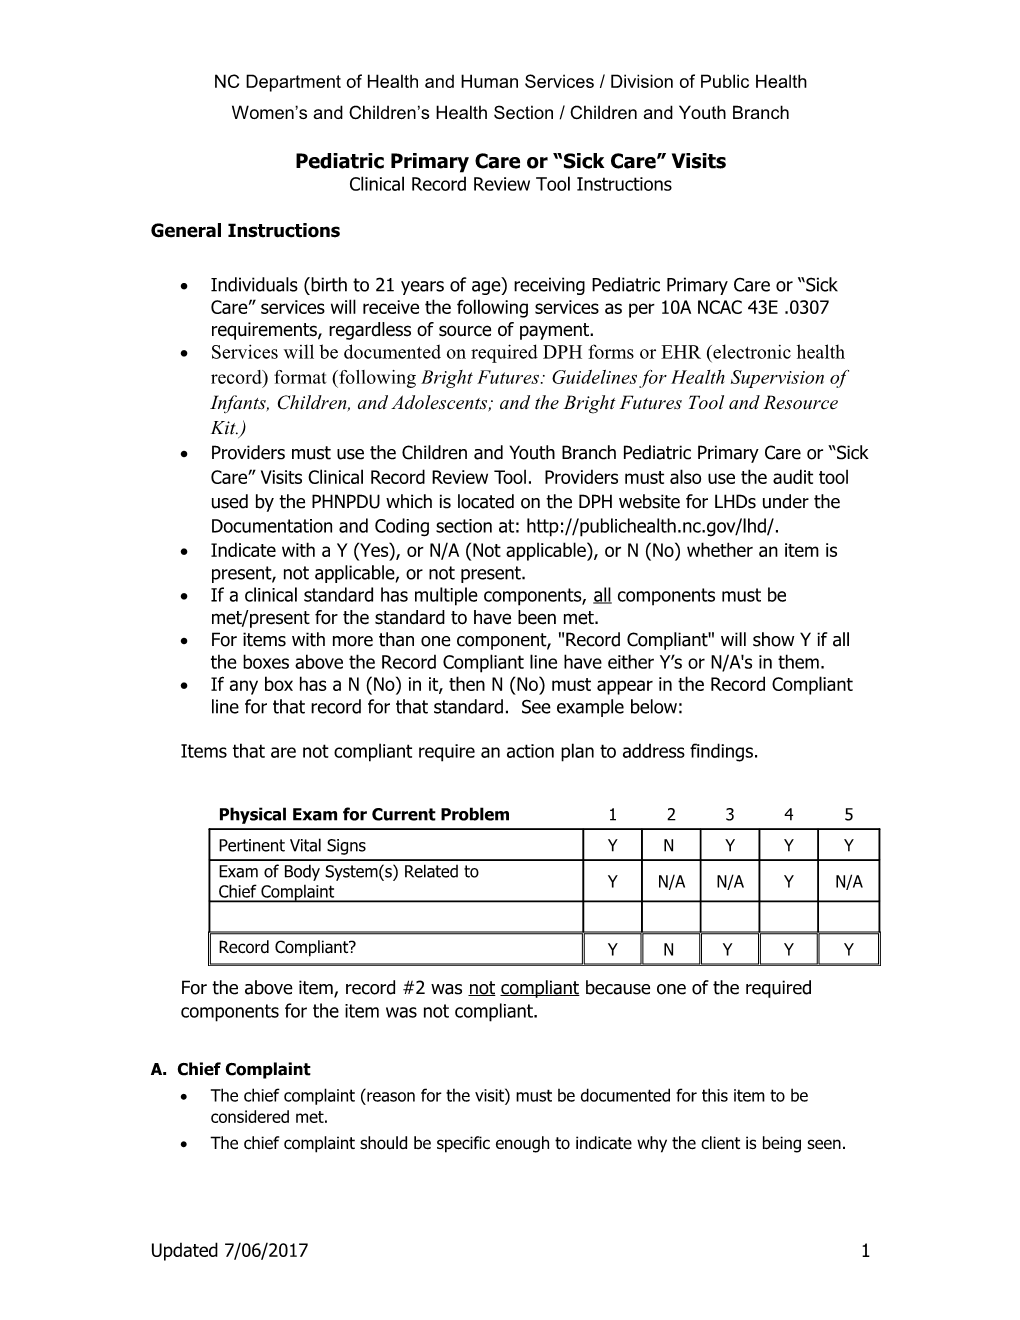 Pediatric Primary Care Record Audit Tool Instructions